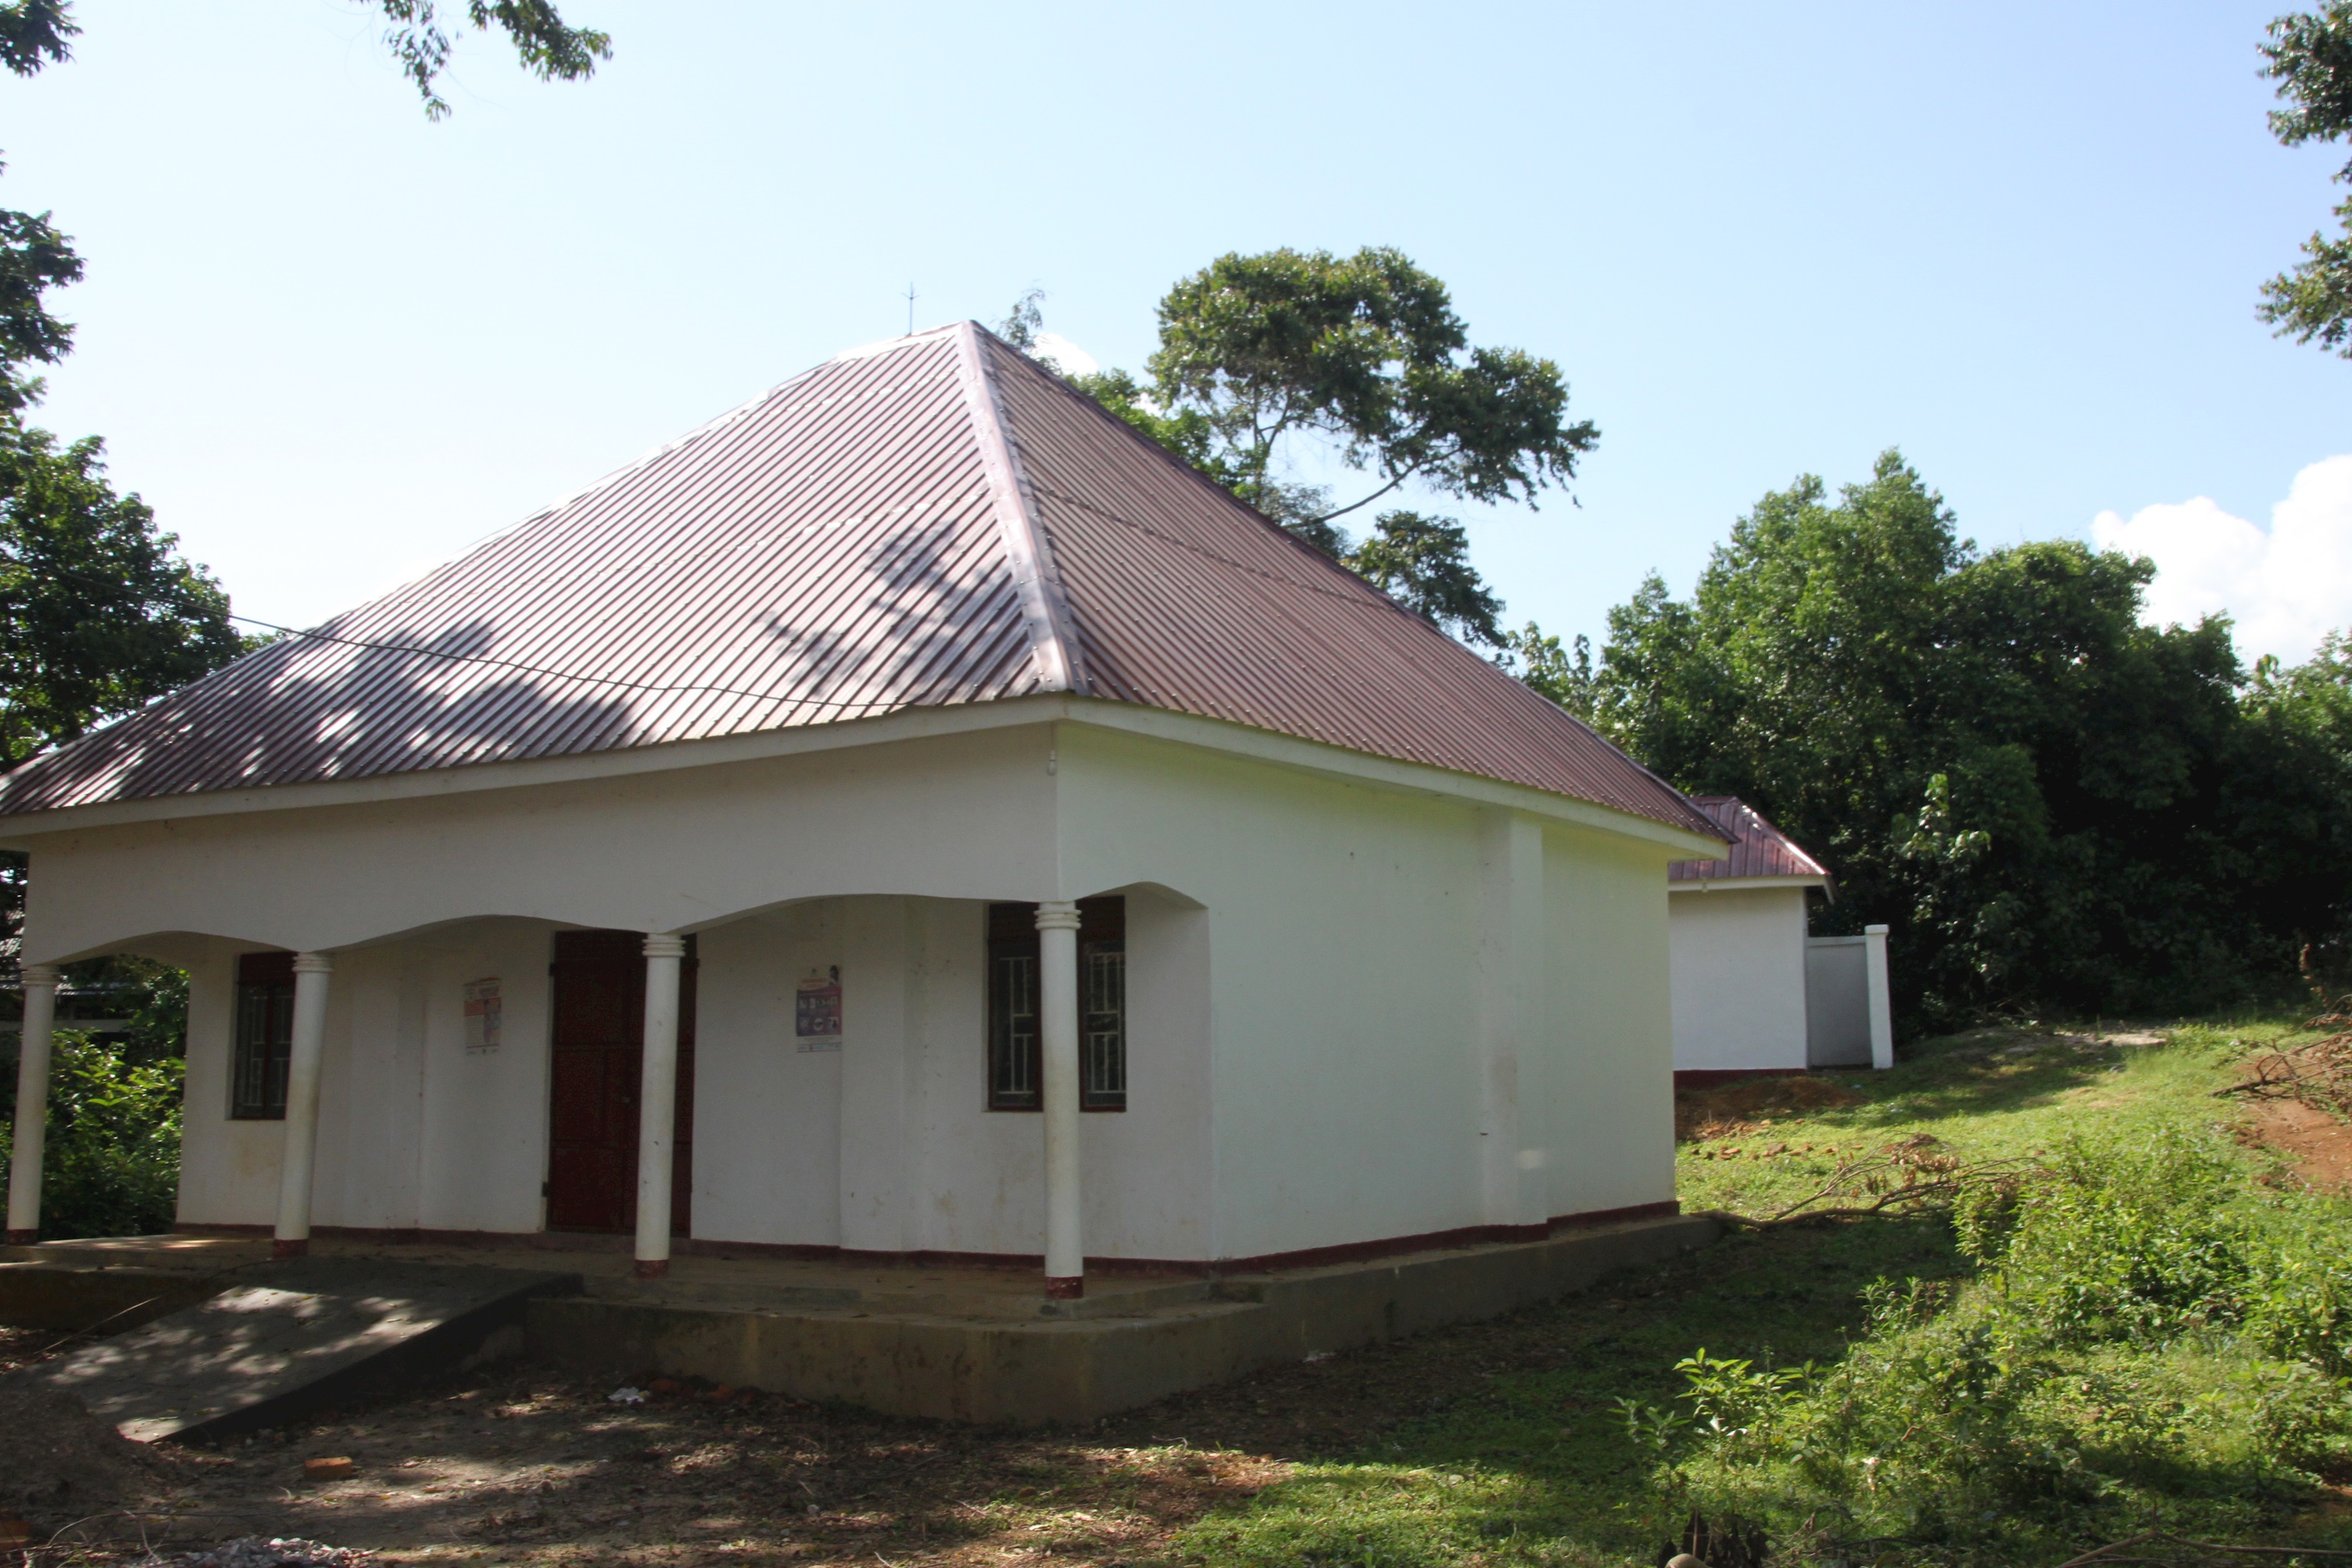 Pangbourne College funds Examination Hall for Nabugabo Community Learning Centre